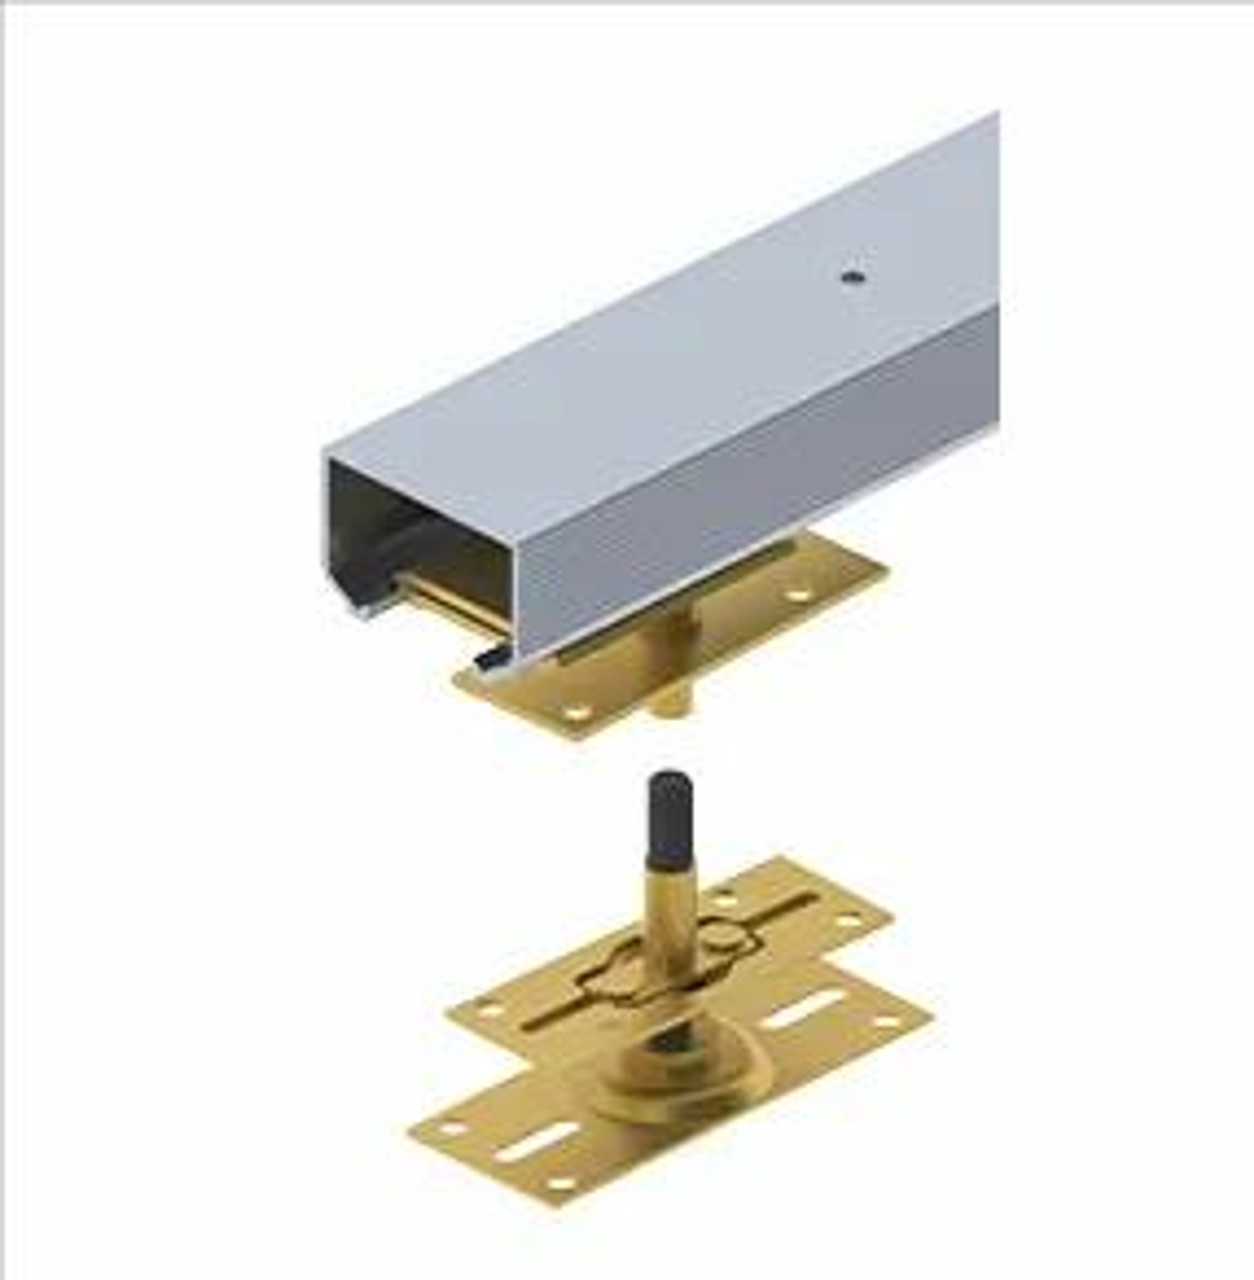  Hager Hardware 9570RC Bi-Fold Hardware 125LBS per Panel Pair For 36", 48", 60", 72" & 96" wide openings 